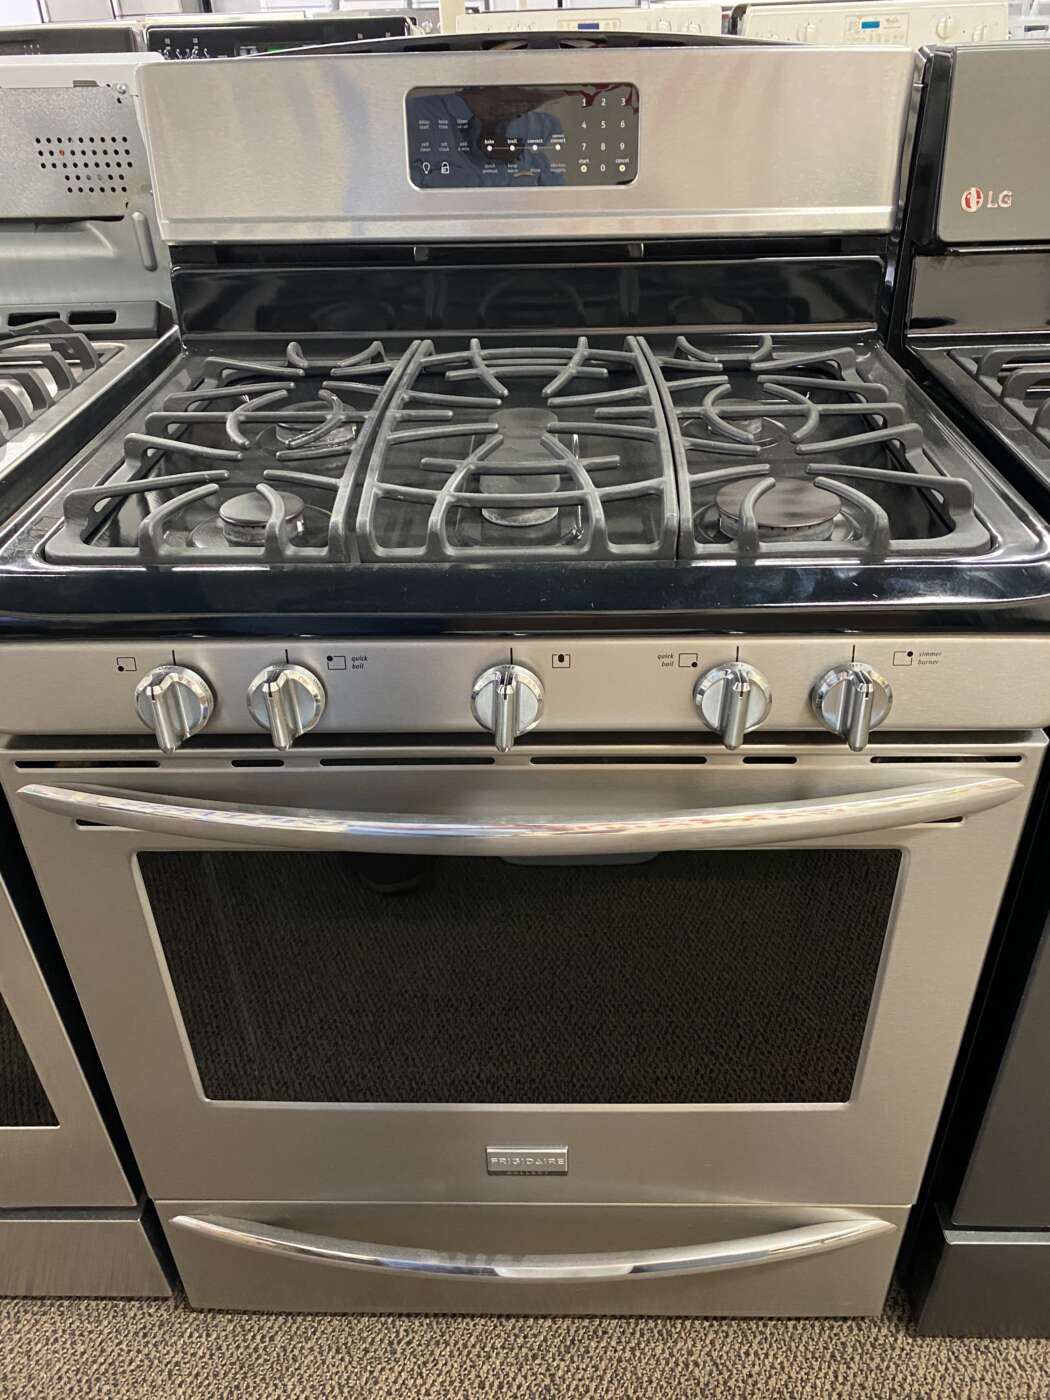 Reconditioned FRIGIDAIRE Self-Clean Convection-Oven GAS Range – Stainless